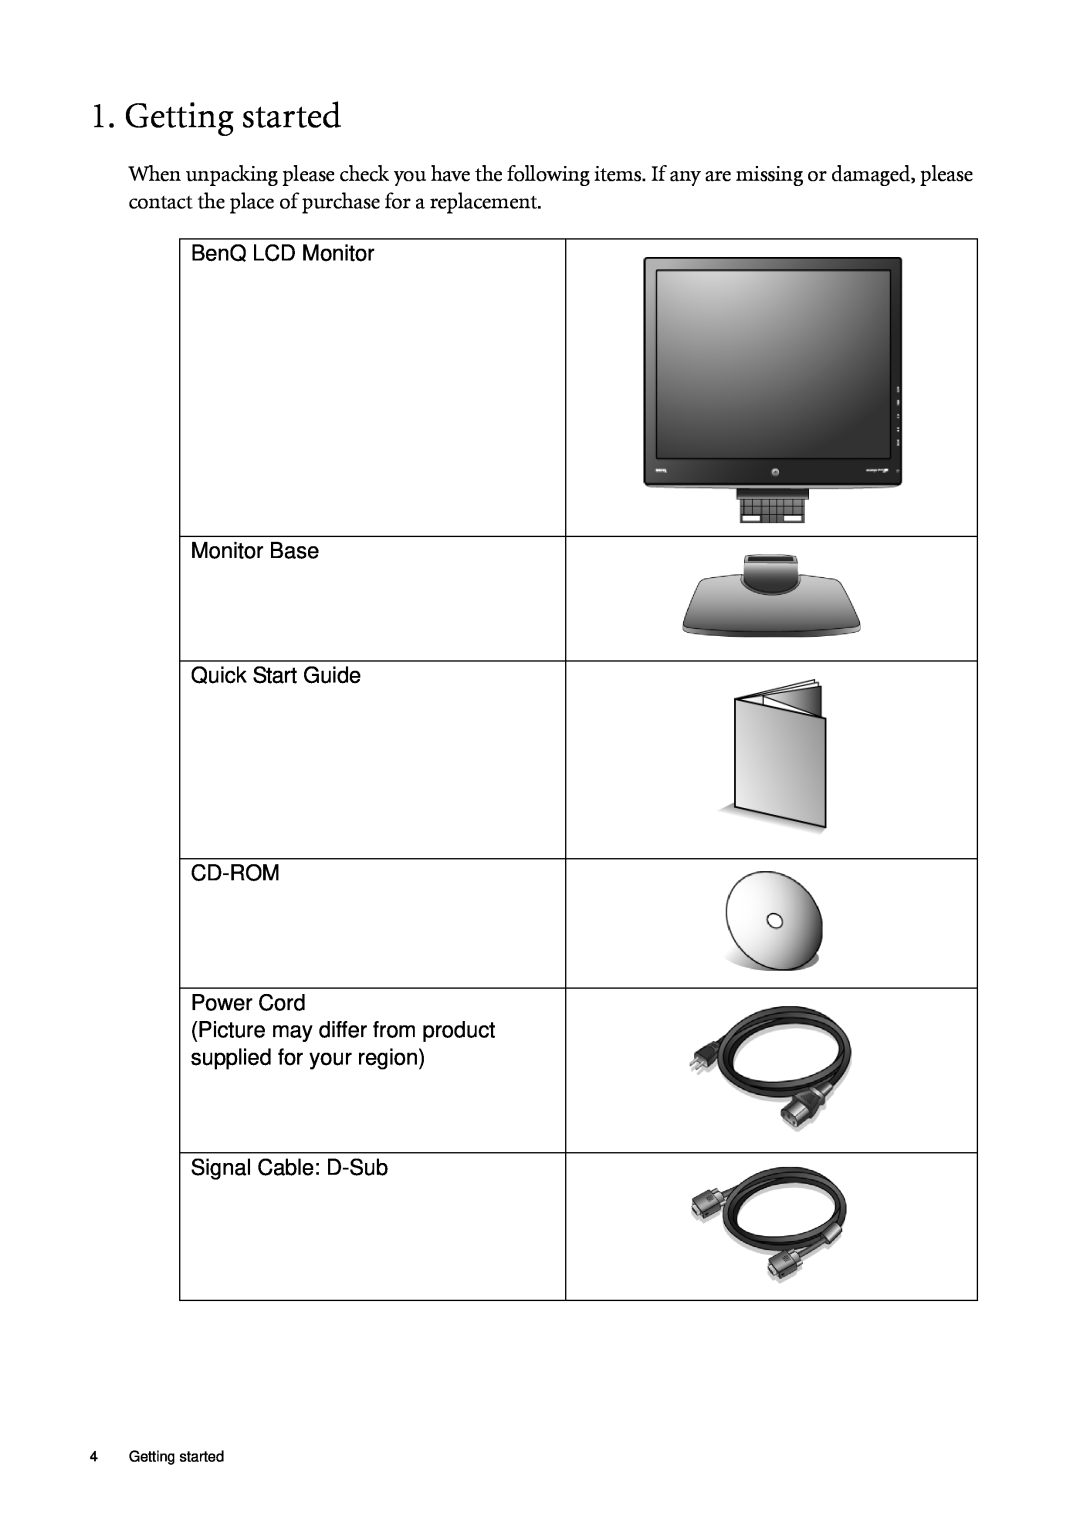 BenQ E2000W, E900W Getting started, BenQ LCD Monitor Monitor Base Quick Start Guide CD-ROM Power Cord, Signal Cable D-Sub 